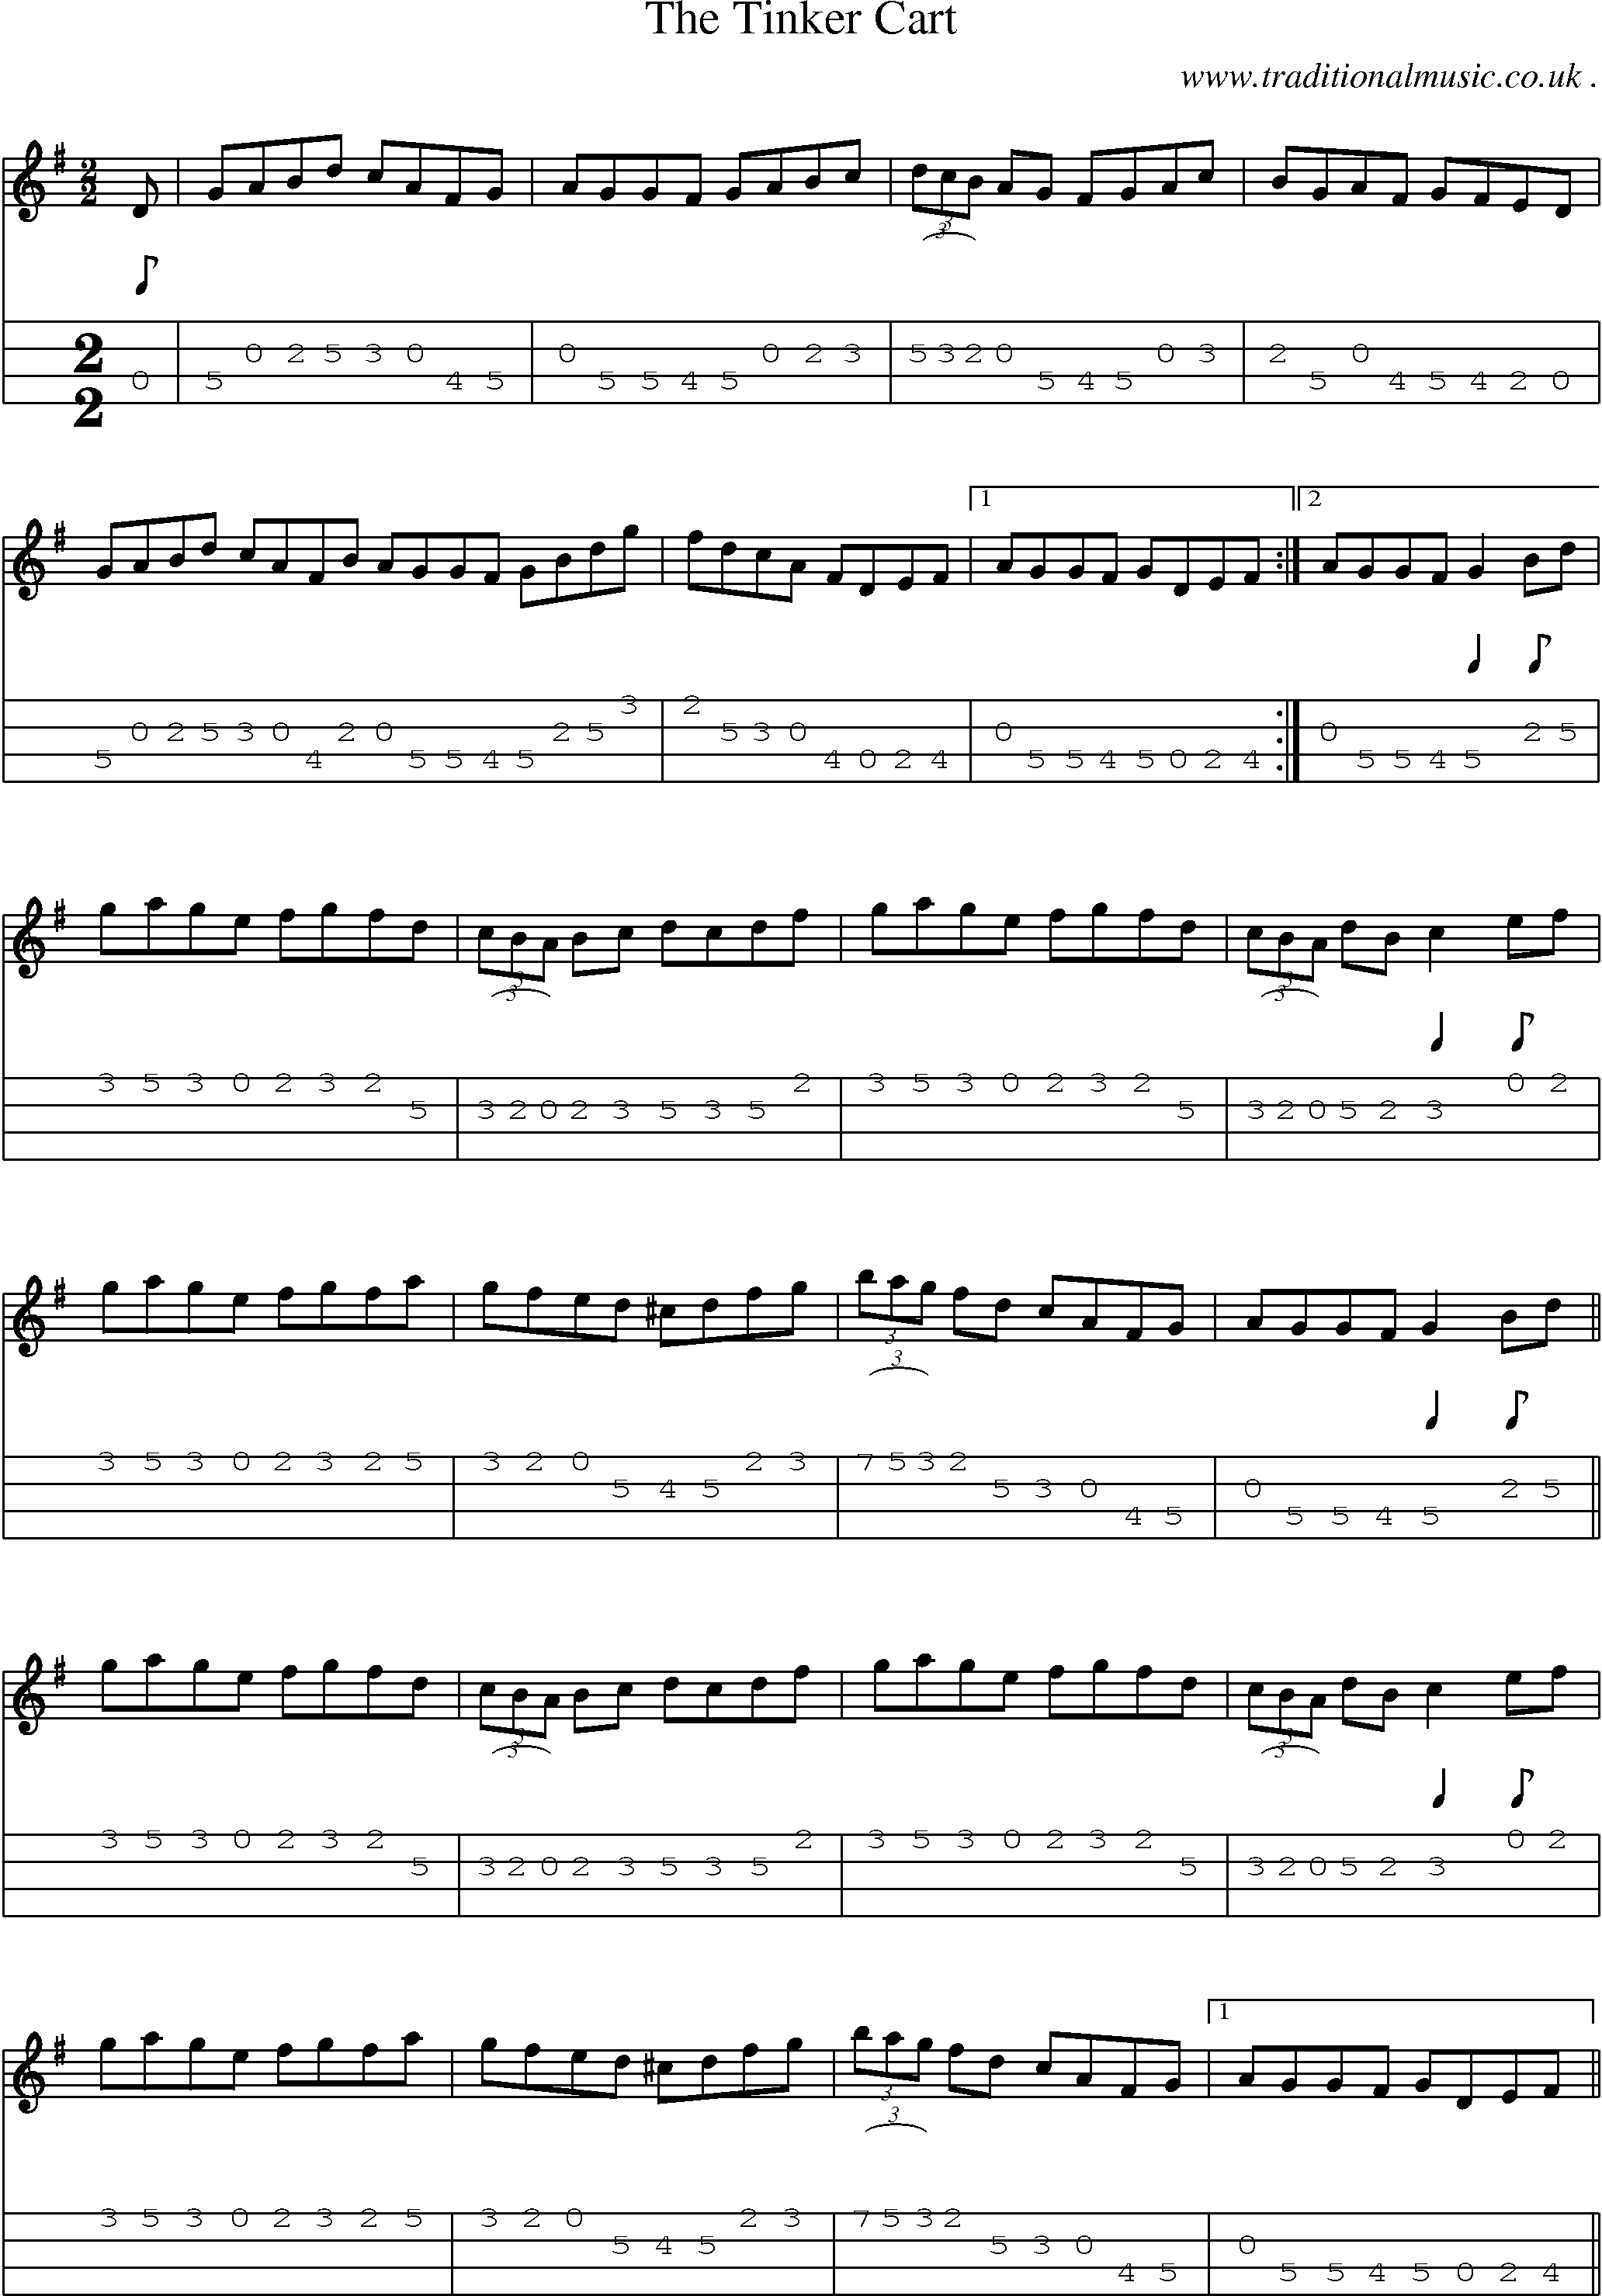 Sheet-Music and Mandolin Tabs for The Tinker Cart